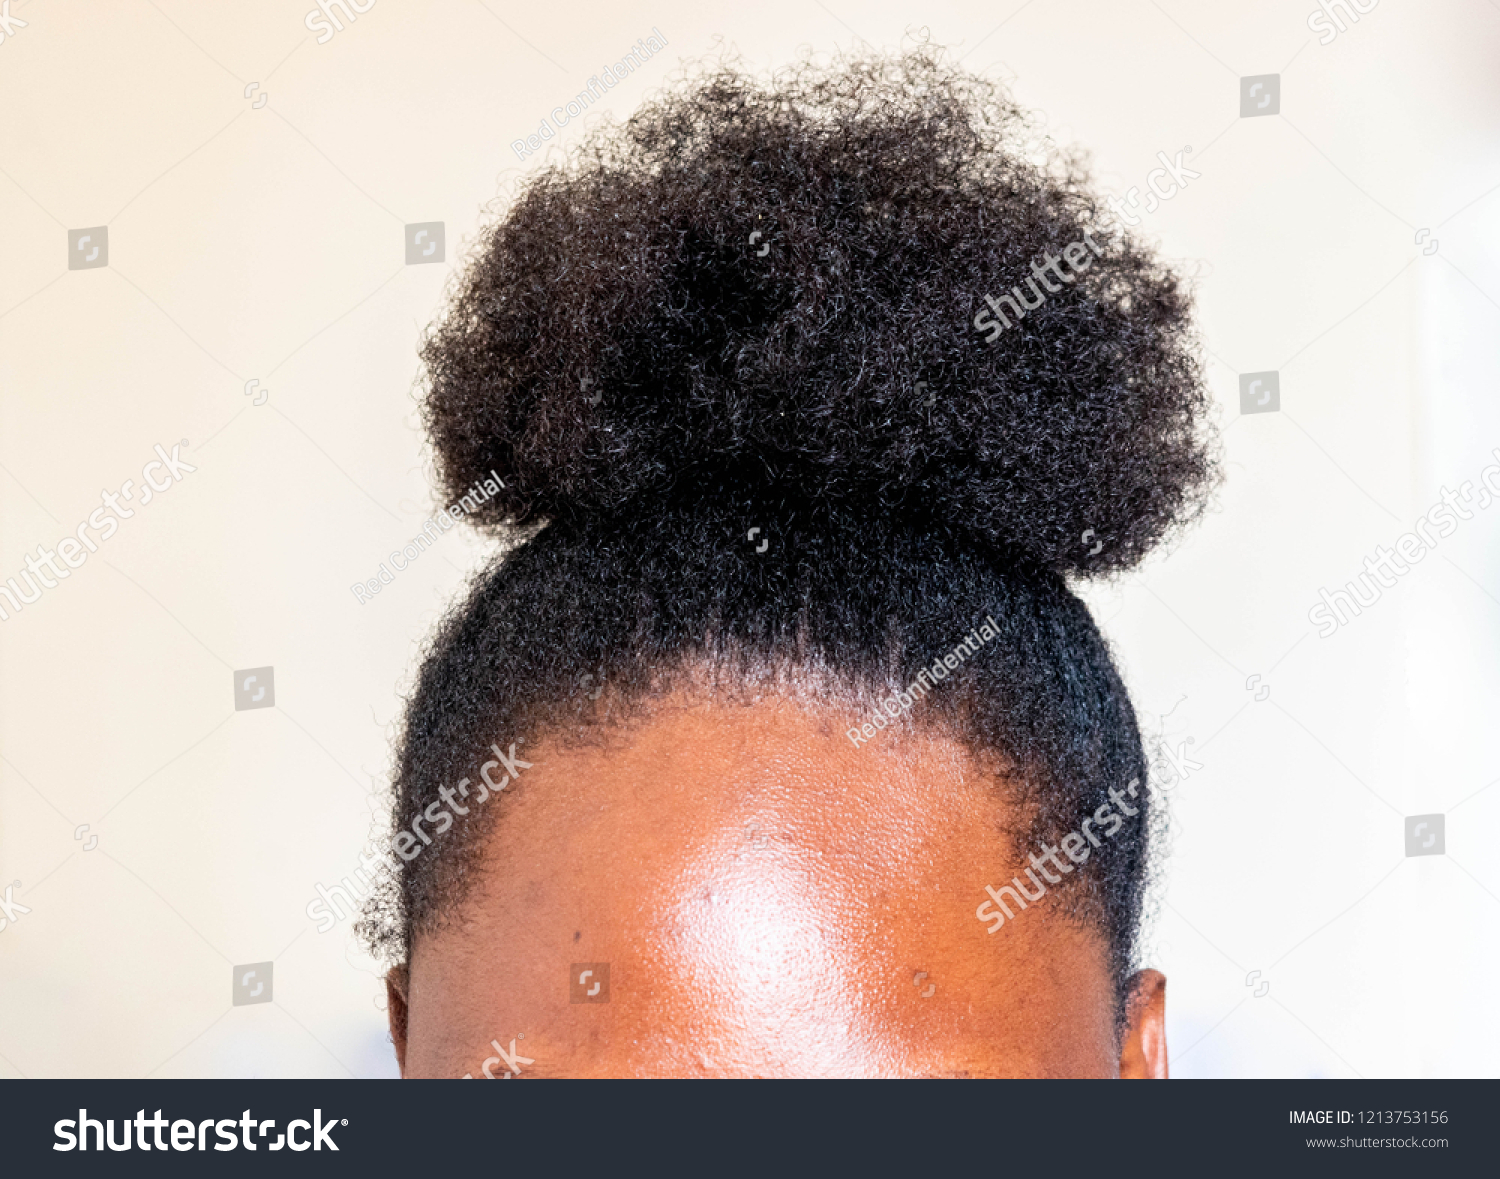 Young Beautiful Black Girl Natural African Royalty Free Stock Image